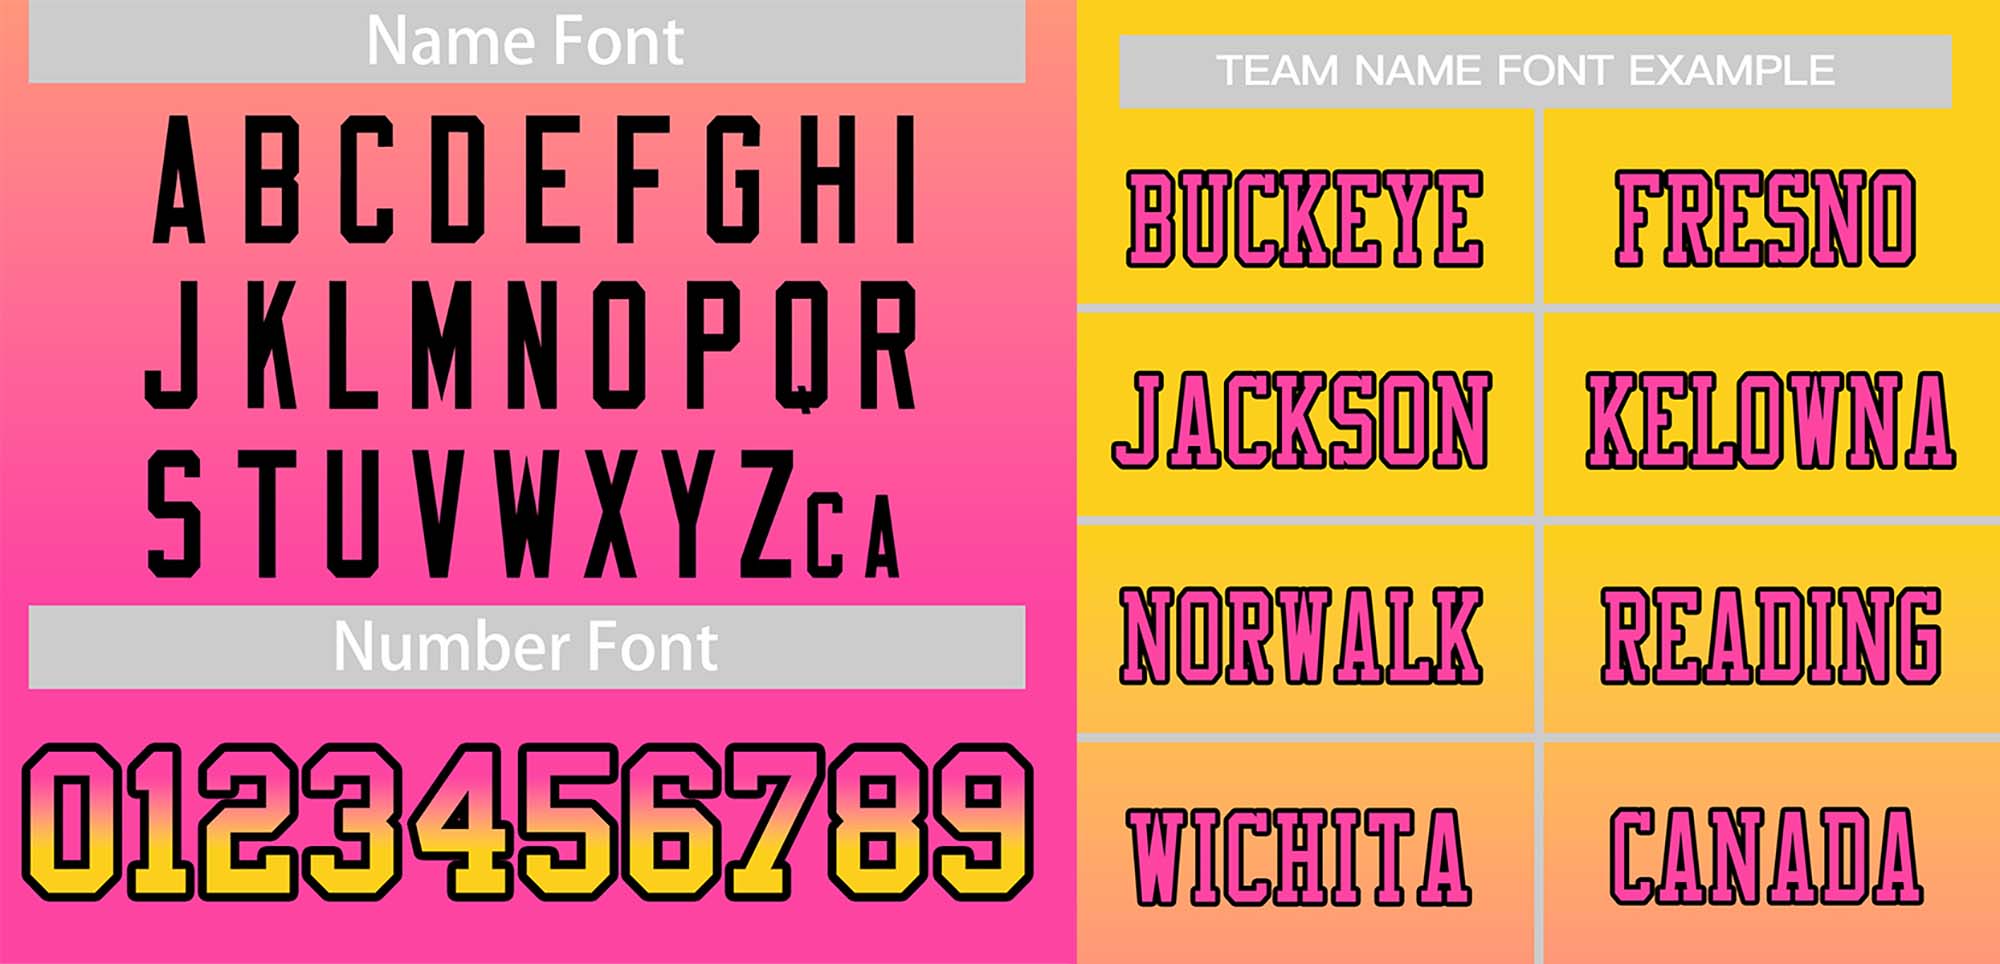 custom yellow and pink gradient football jersey name font